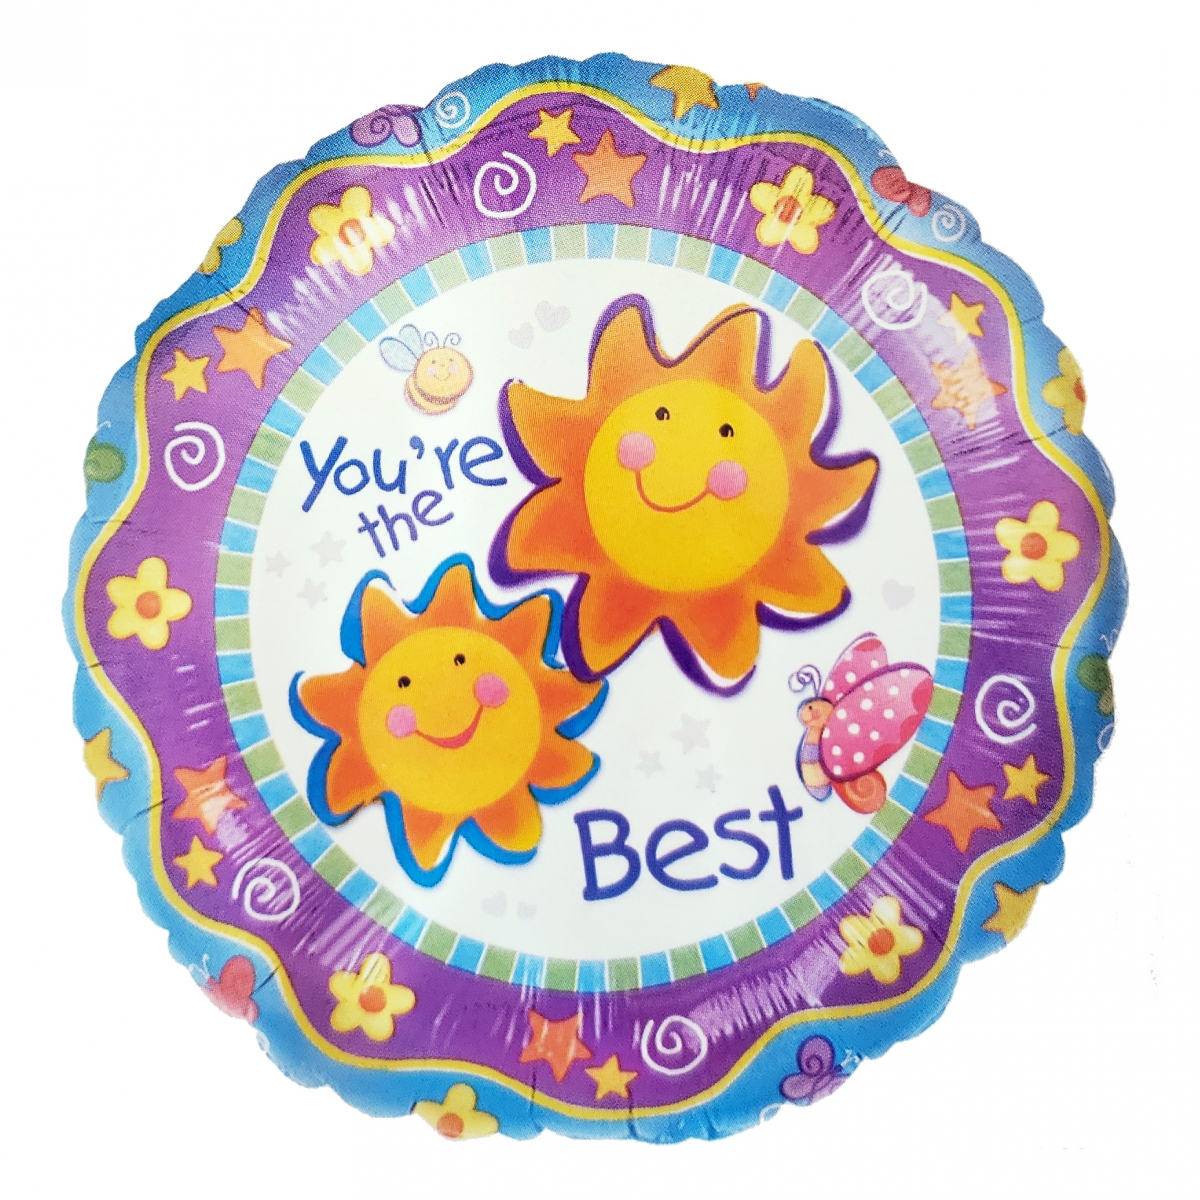 18" Foil - Chatterbox You're The Best balloon